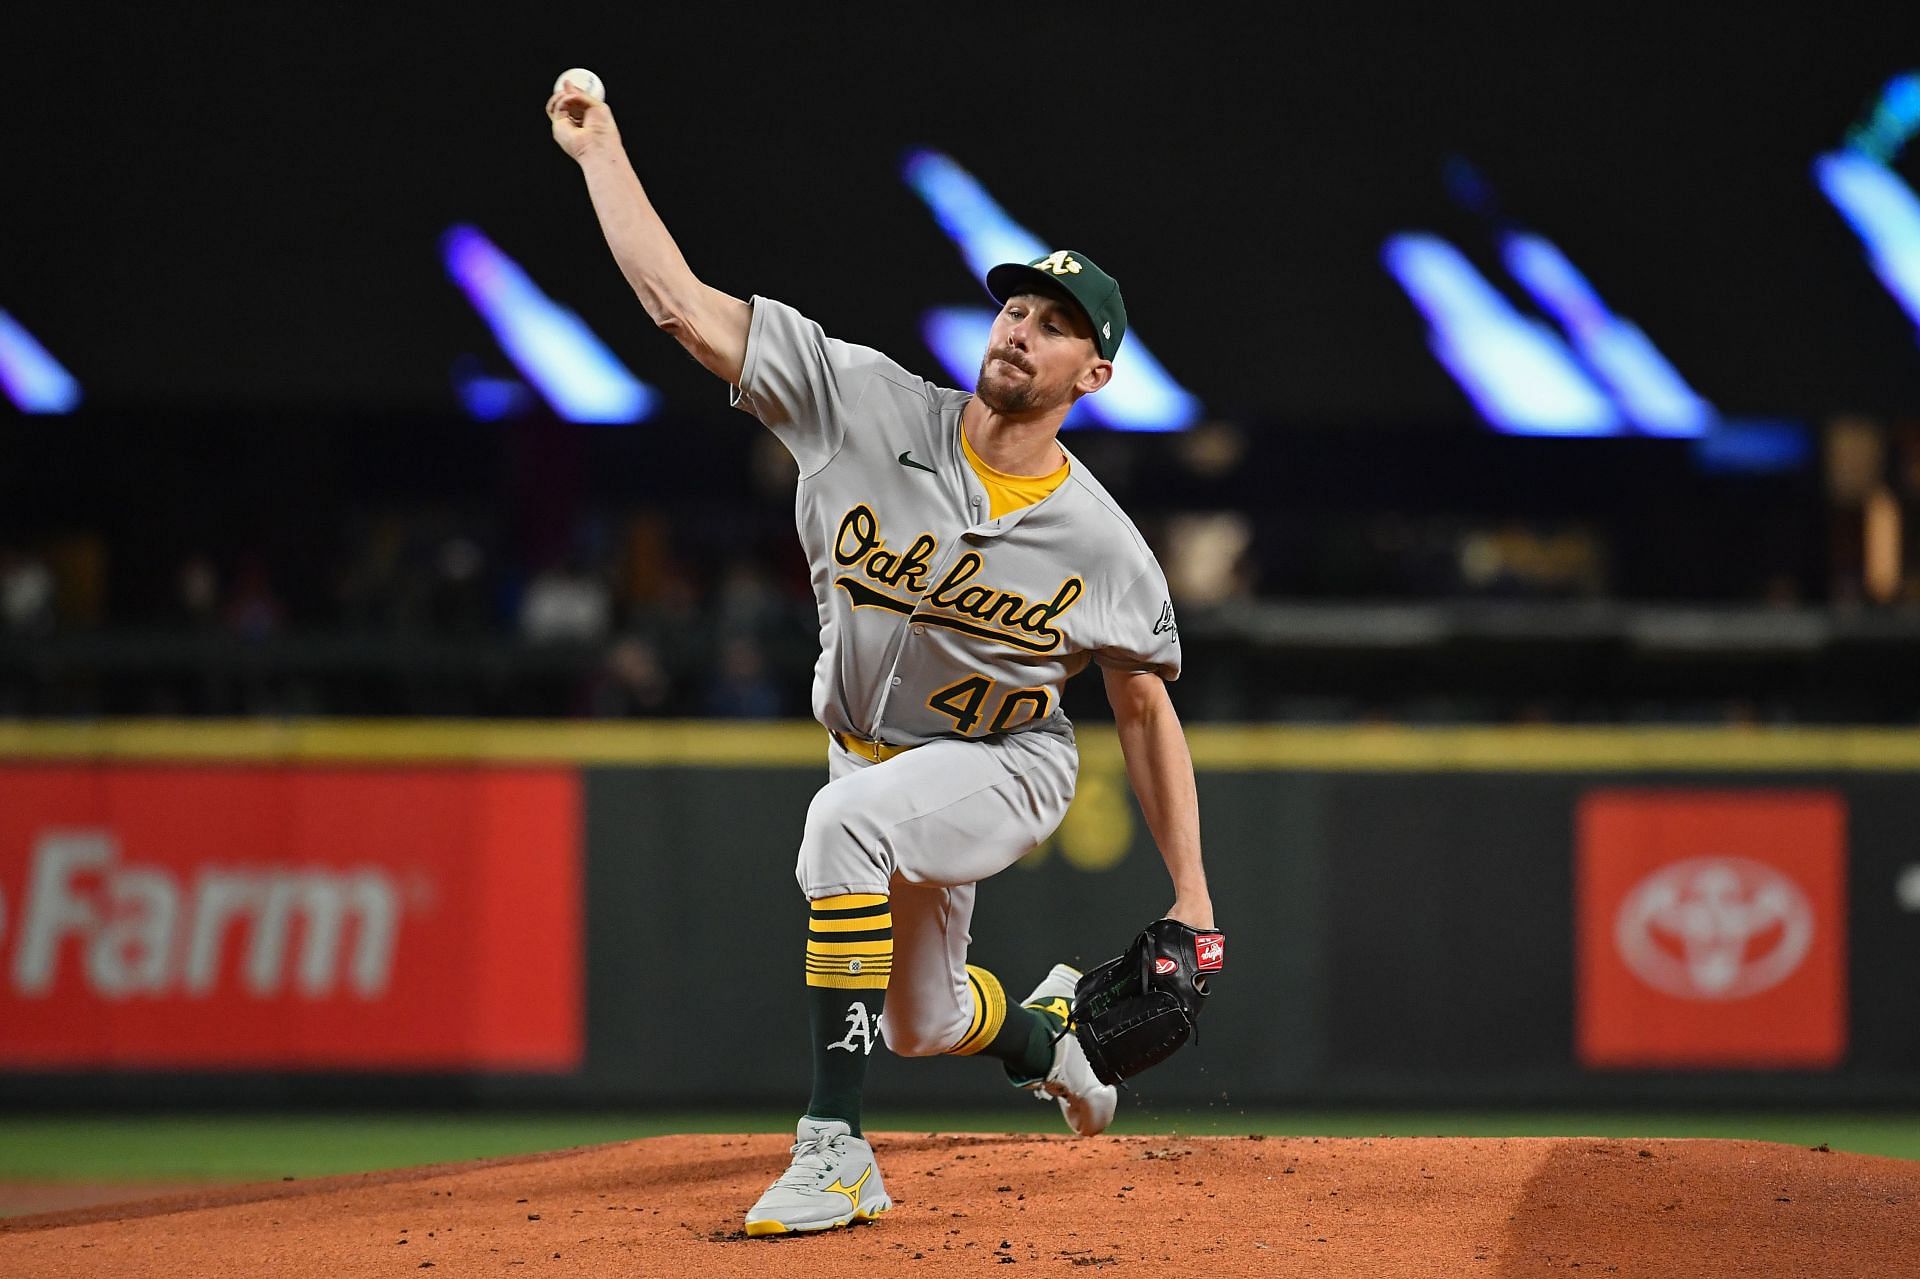 Oakland Athletics v Seattle Mariners SEATTLE, WASHINGTON - SEPTEMBER 28: Chris Bassitt #40 of the Oakland Athletics throws a pitch during the first inning against the Seattle Mariners at T-Mobile Park on September 28, 2021 in Seattle, Washington. (Photo by Alika Jenner/Getty Images)